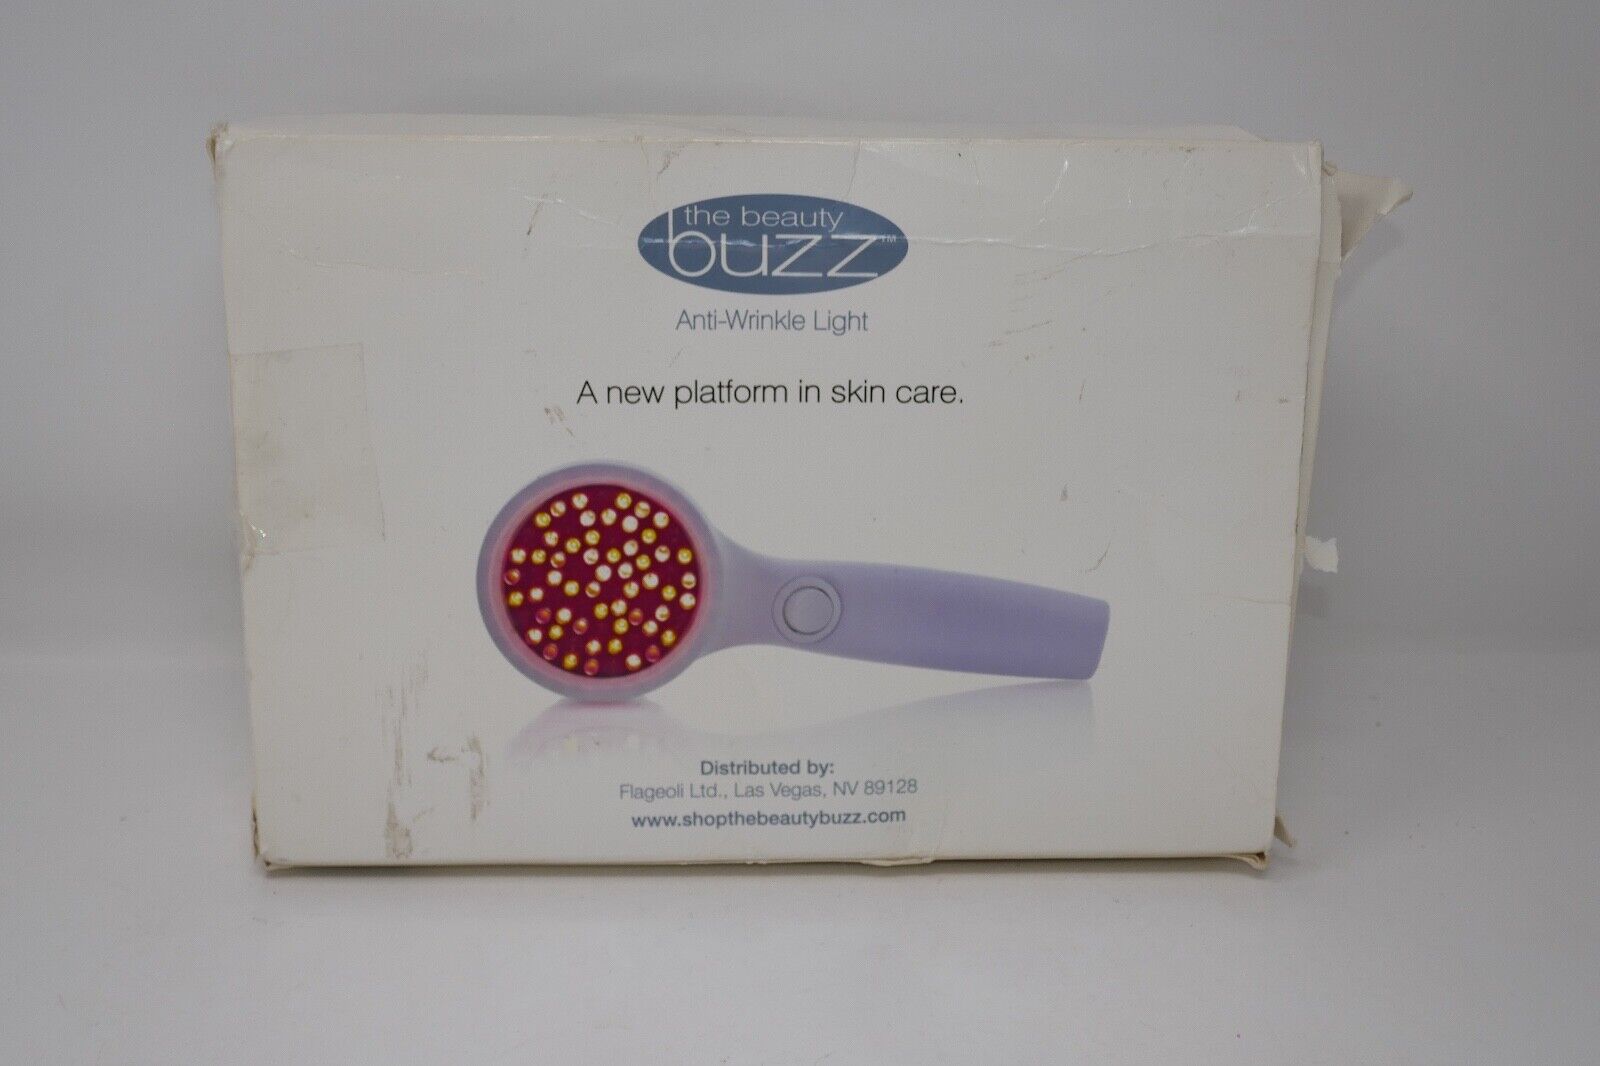 The Beauty Buzz Anti-Wrinkle LED Light Tool with Serum